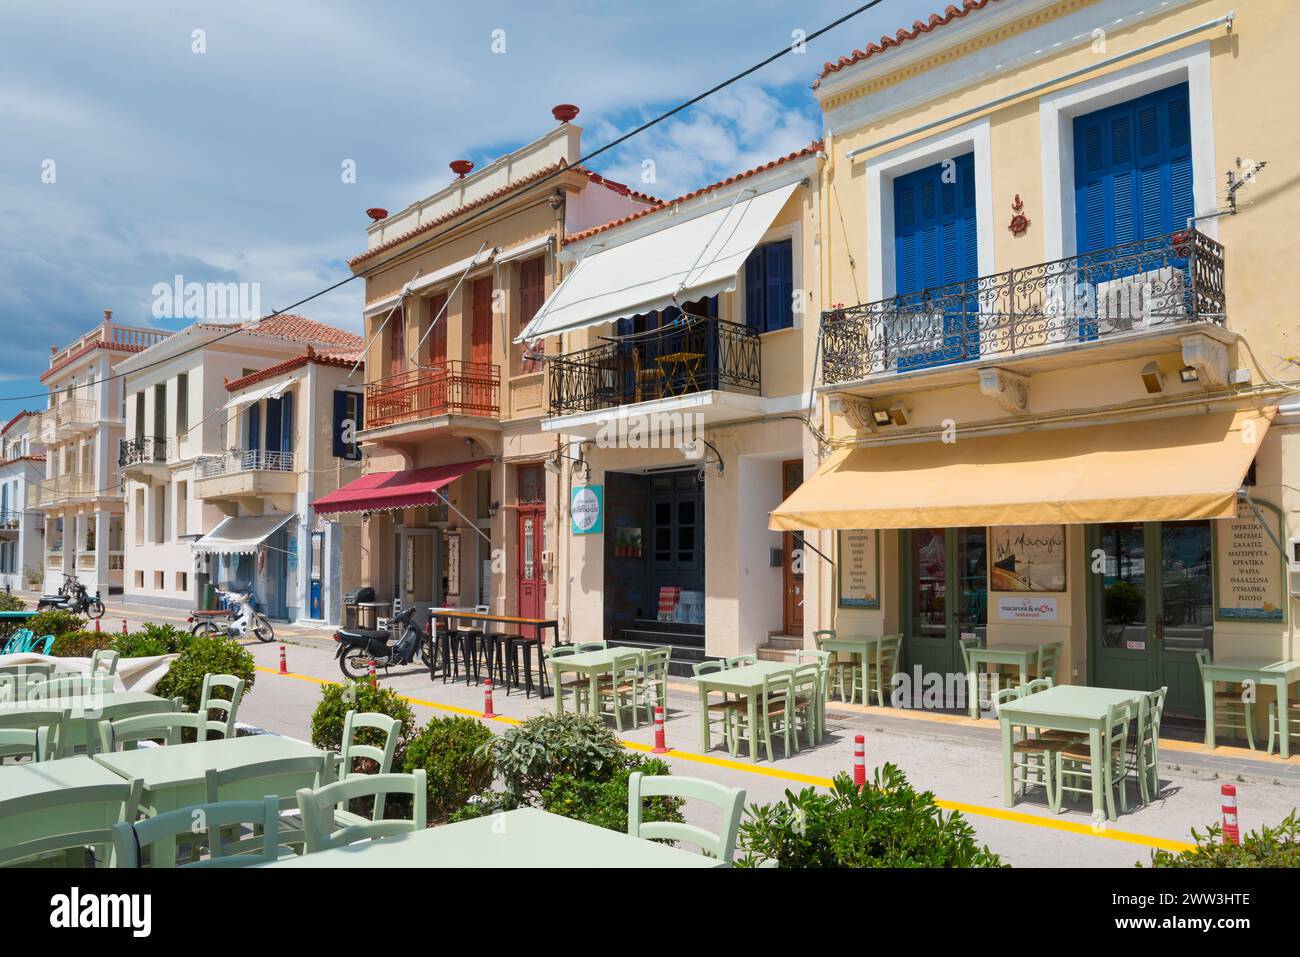 Mediterranean street with colourful buildings, an outdoor restaurant and a clear blue sky, promenade, Poros, Poros Island, Saronic Islands Stock Photo